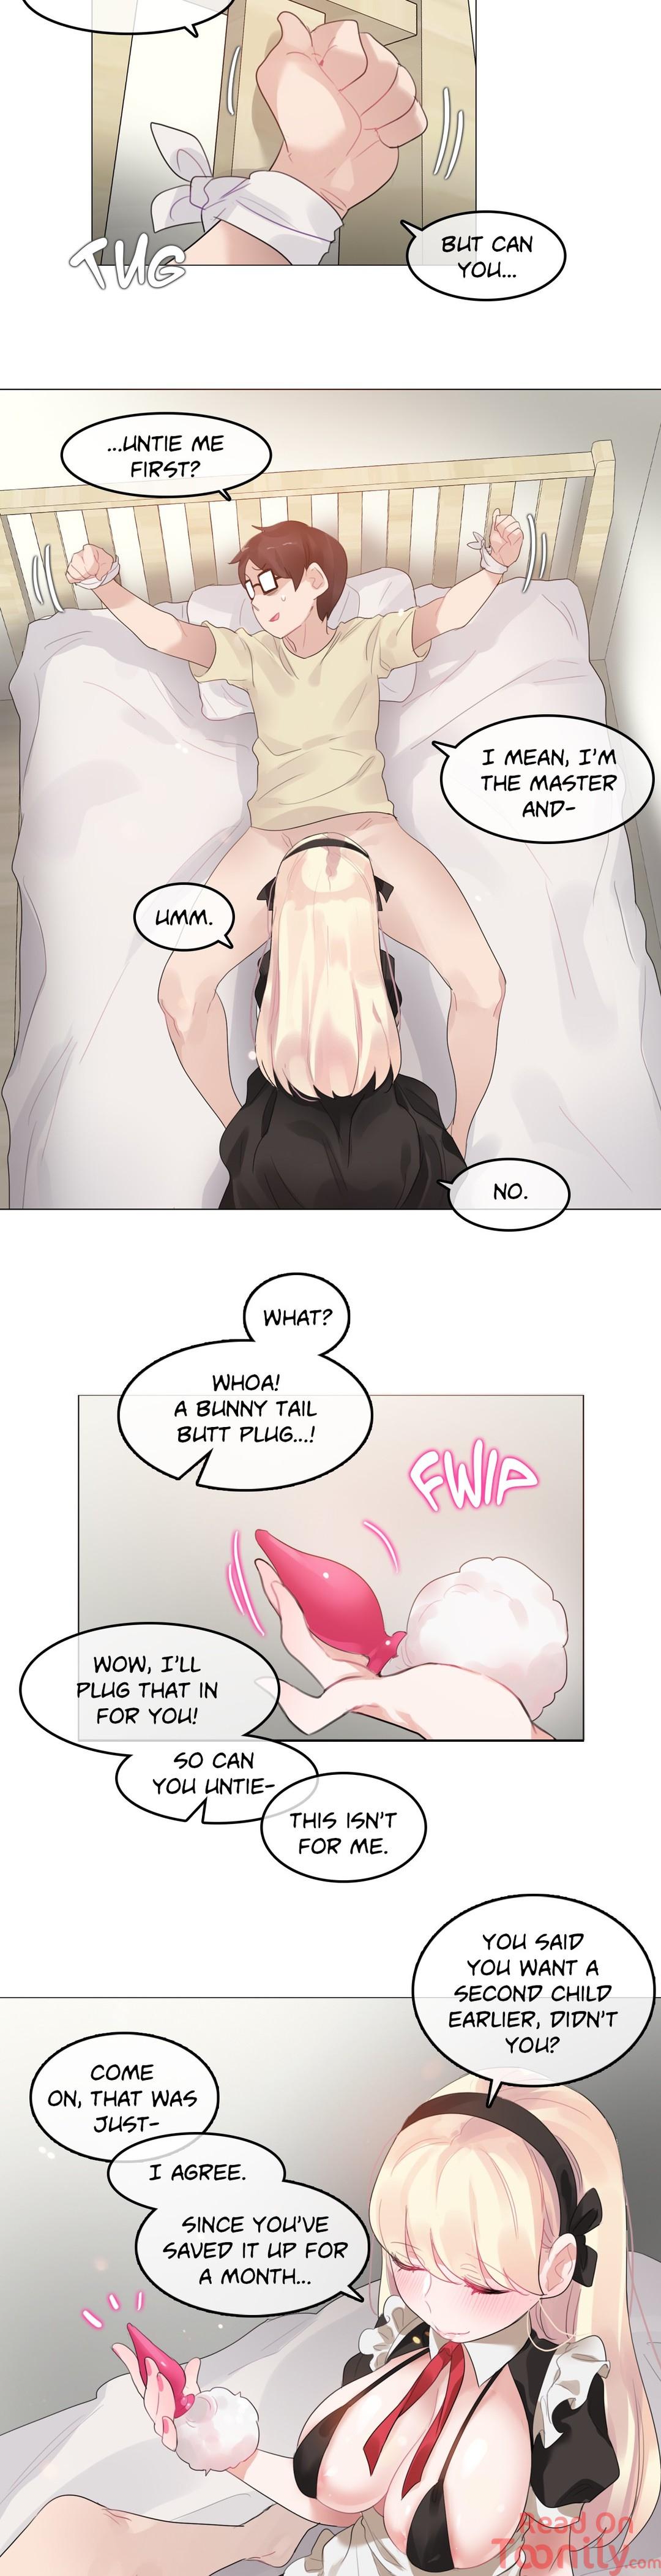 A Pervert's Daily Life • Chapter 66-70 88